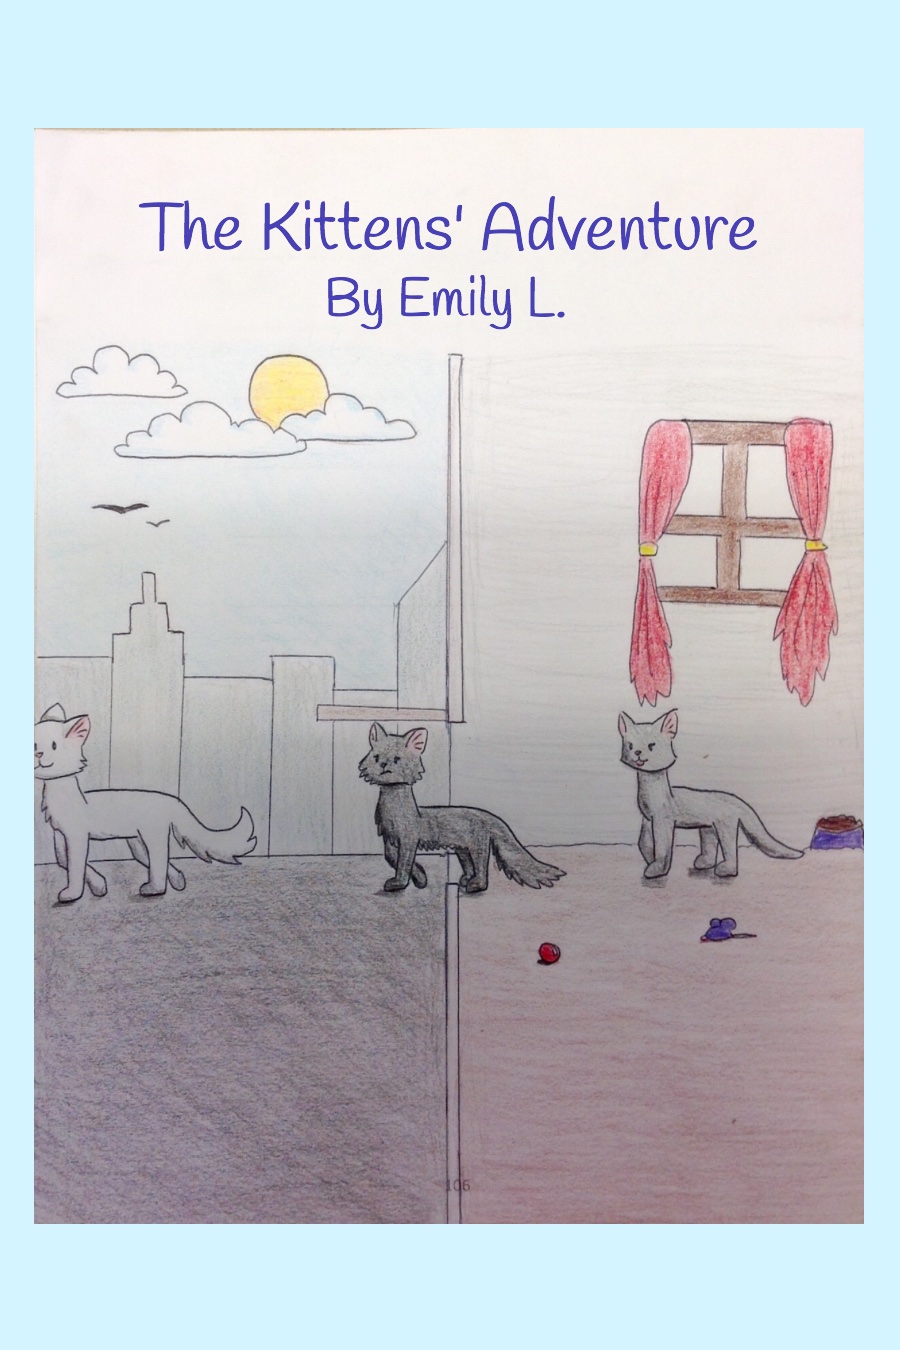 The Kittens’ Adventure by Emily L